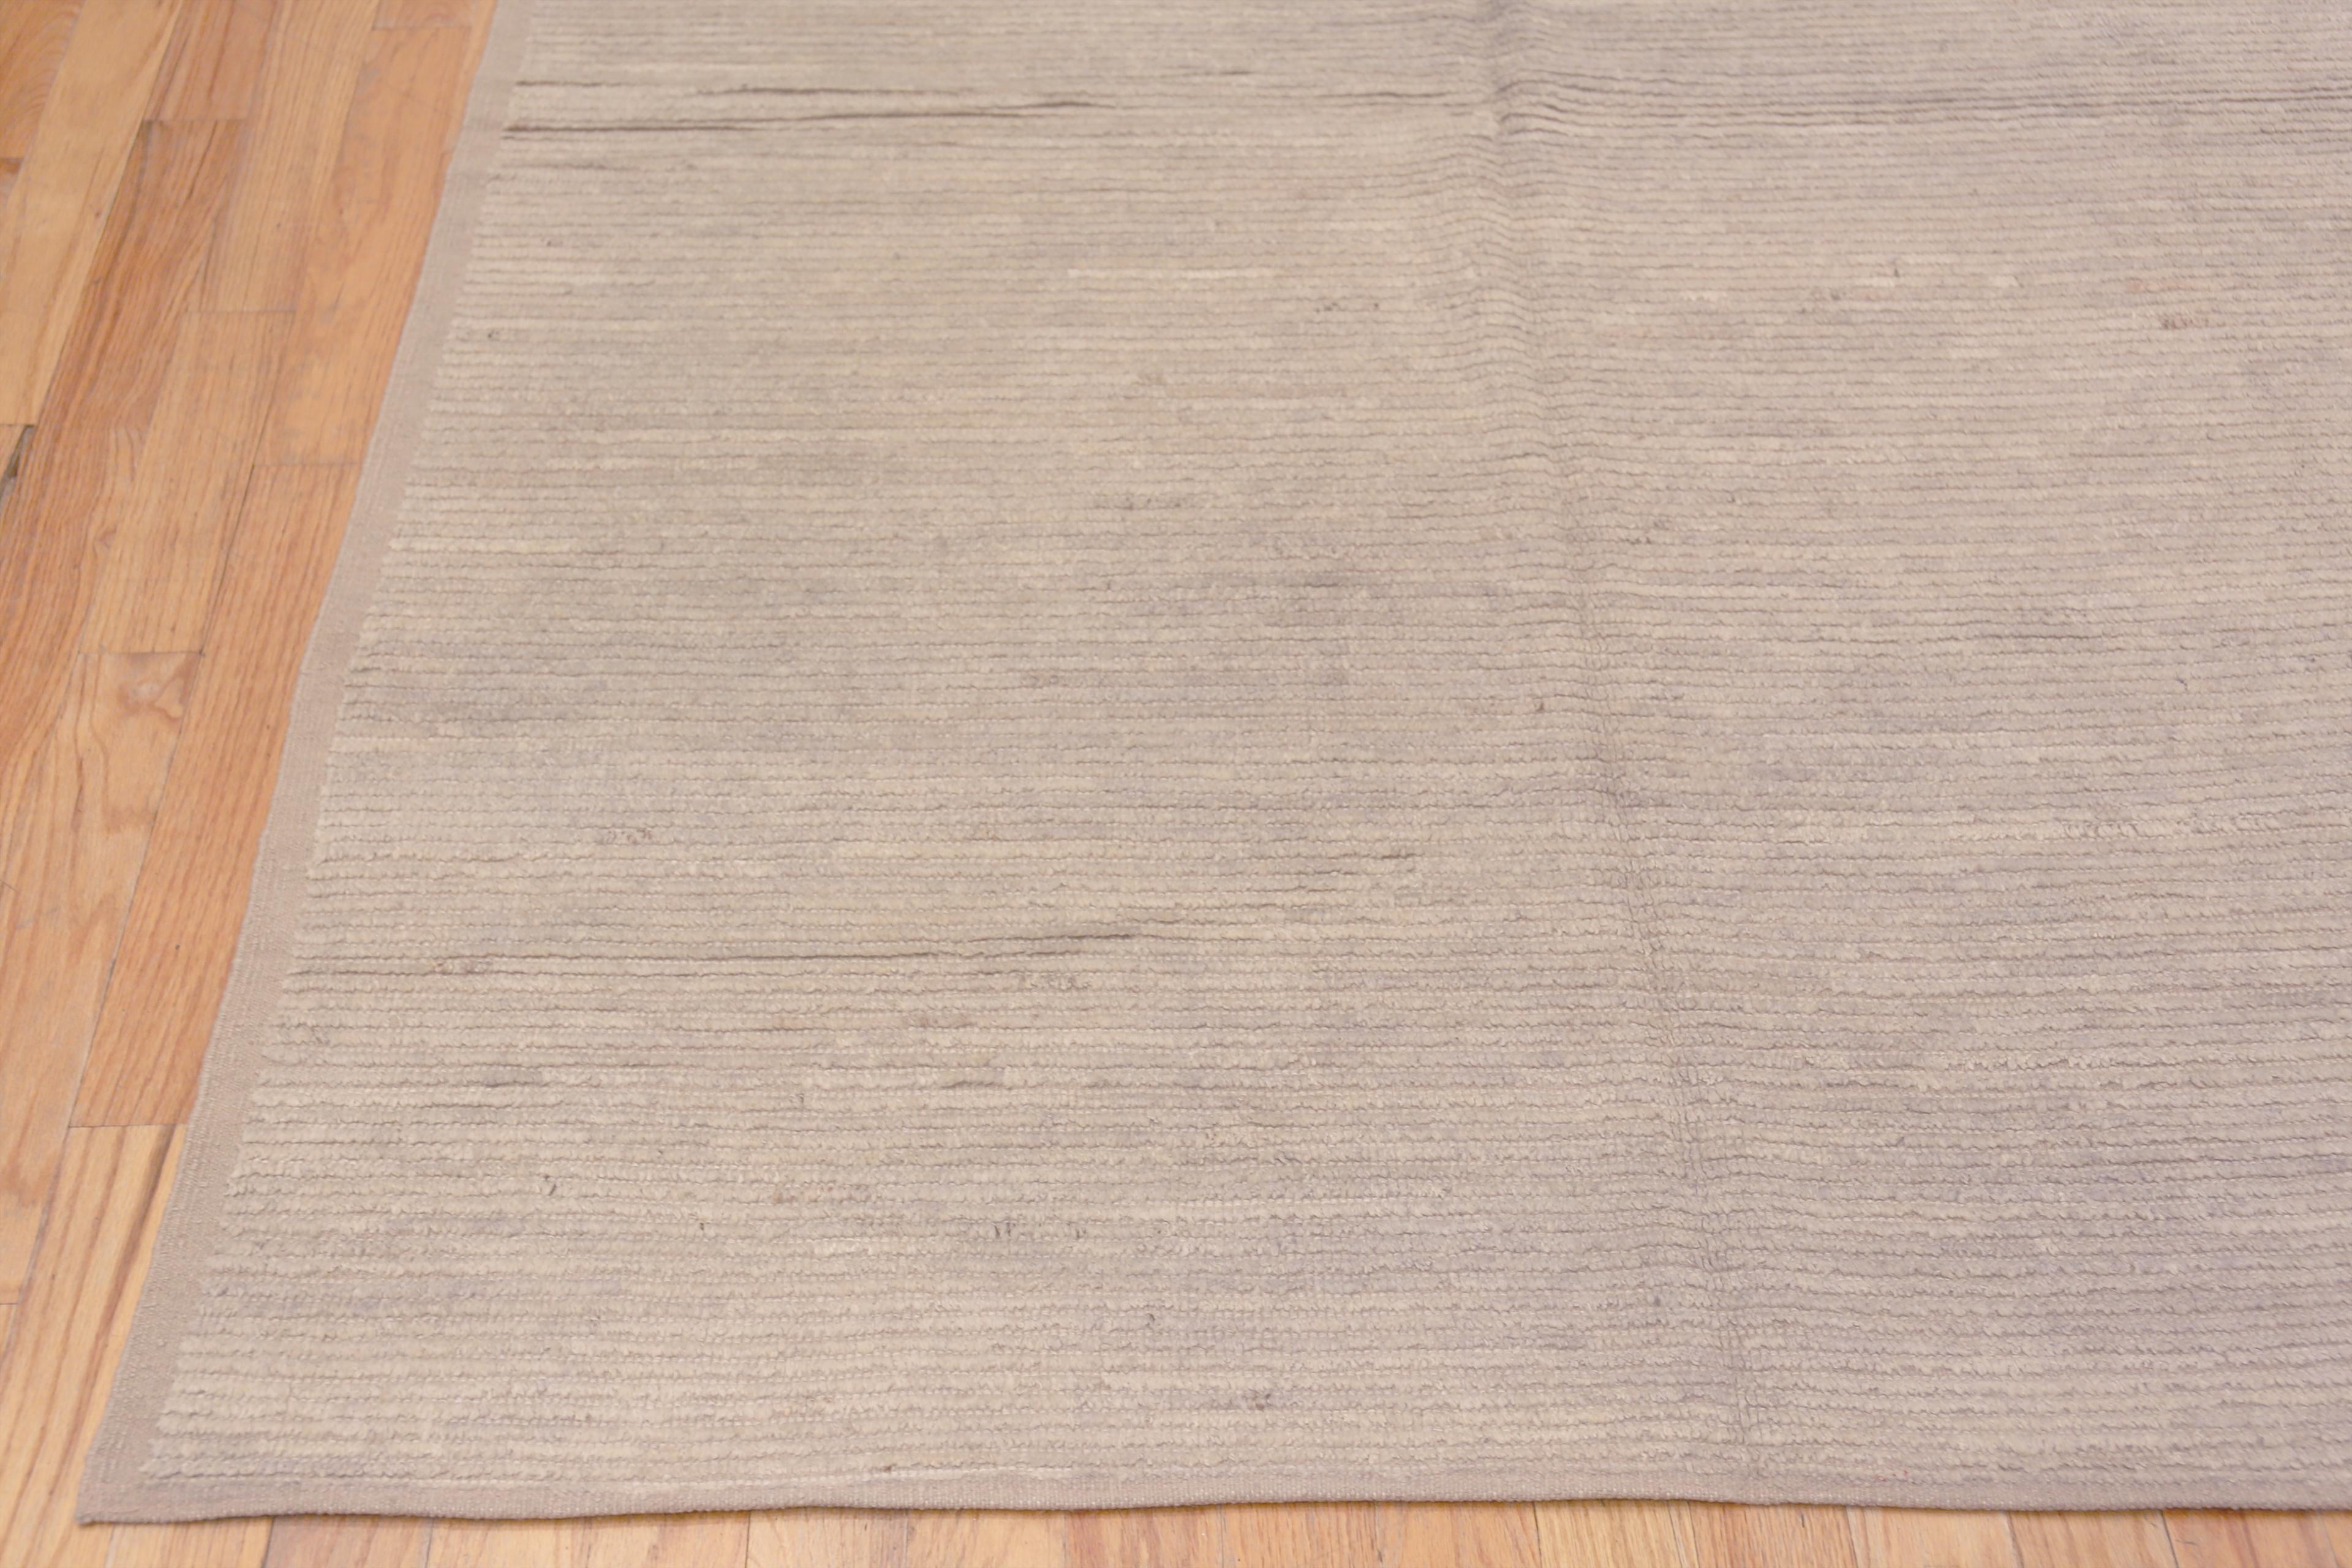 Wool Nazmiyal Collection Elegant Solid Abstract Cream Color Modern Rug 8'11